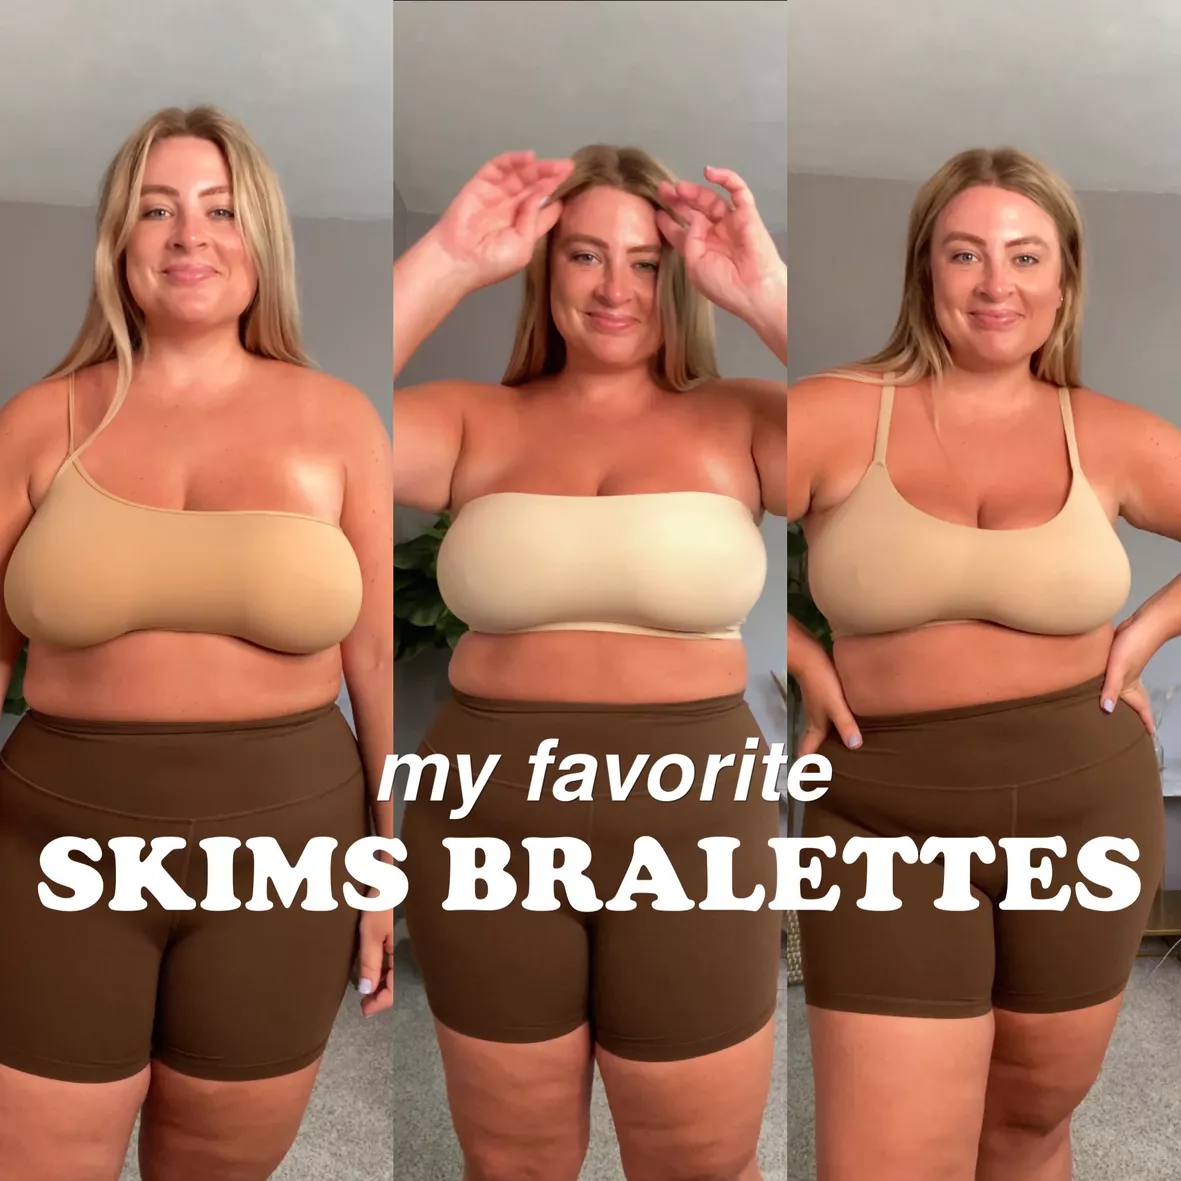 I have 36J boobs and tried the Skims bandeau bra in 2X - I was